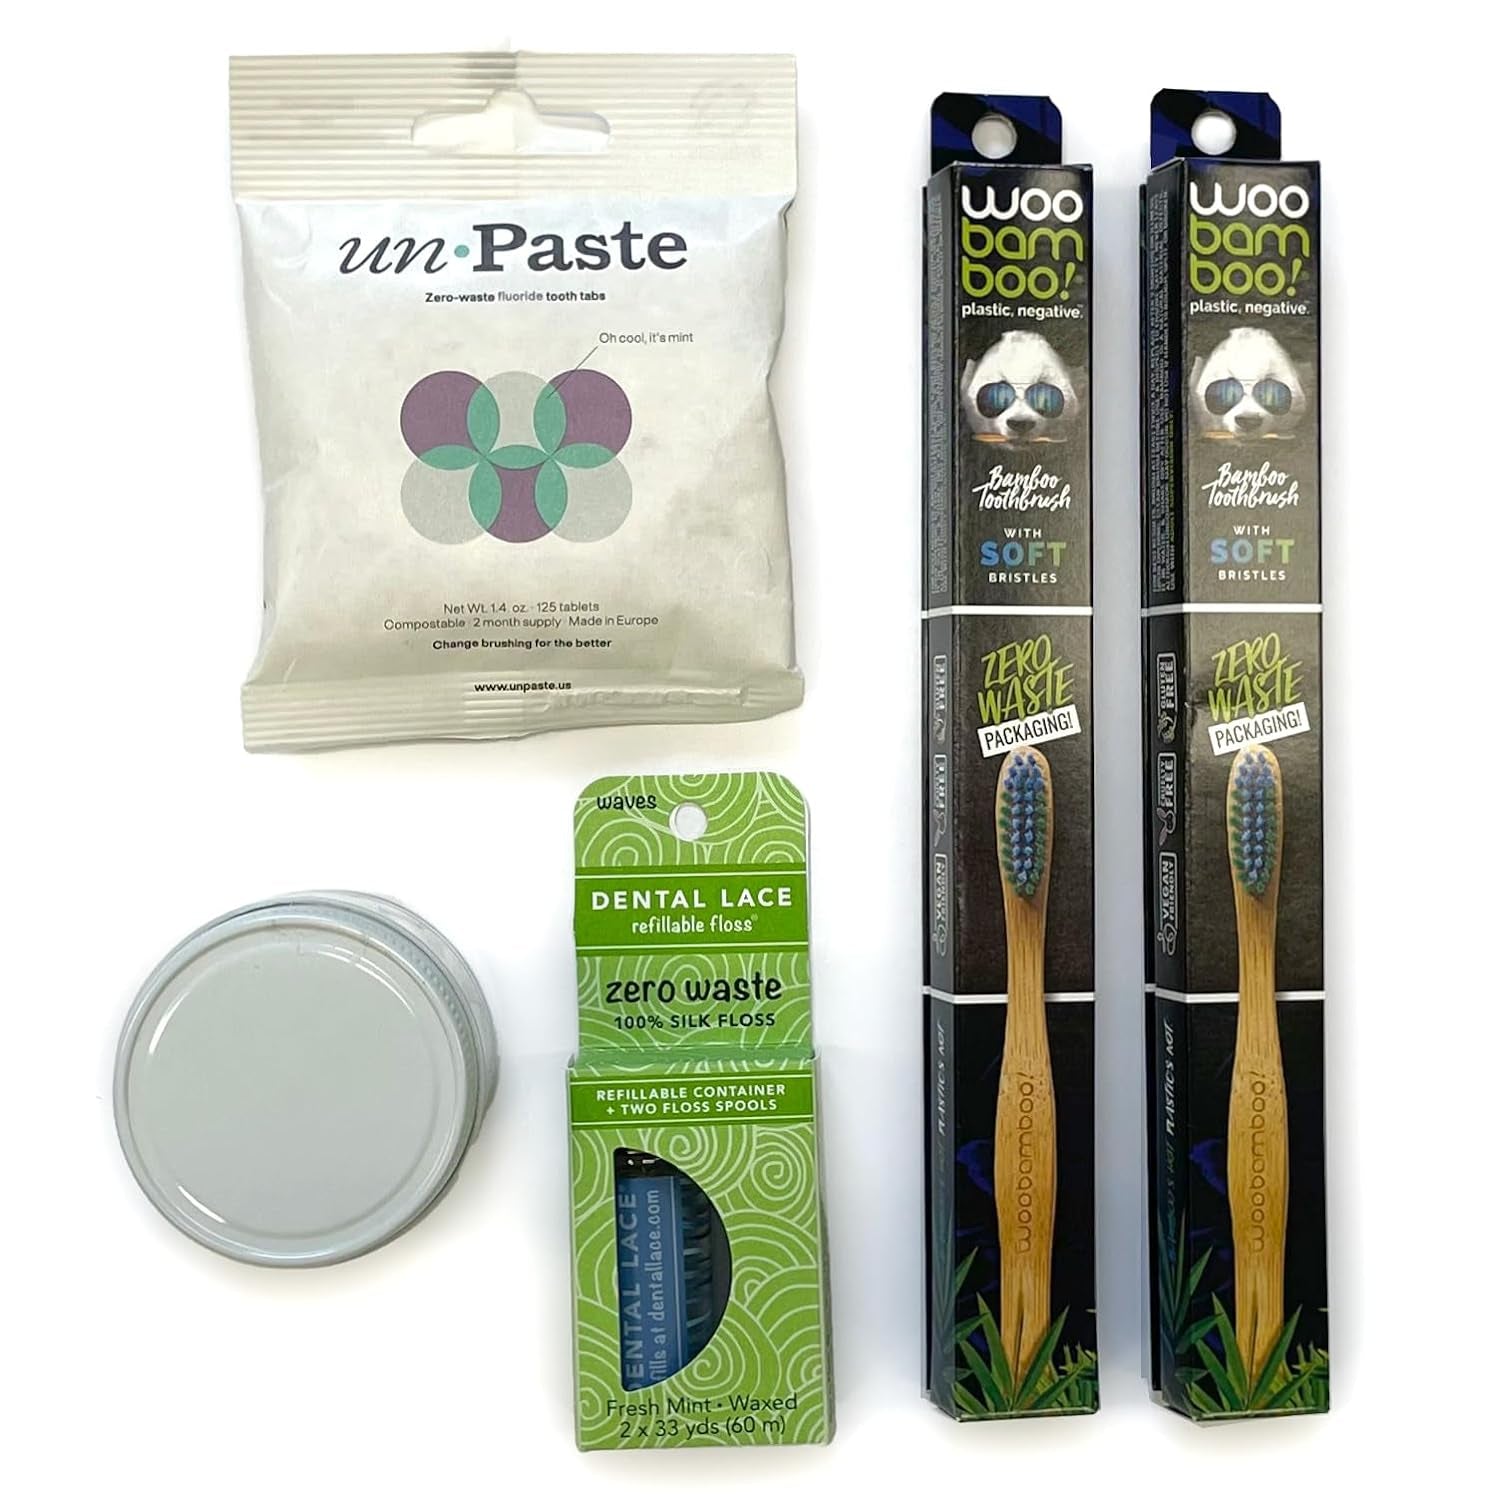 Oral Care Set | Unpaste Toothpaste Tabs with Reusable Glass Jar (Fluoride) | Two Bamboo Toothbrushes | Dental Lace Natural Dental Floss | Sustainable Dental Care Kit